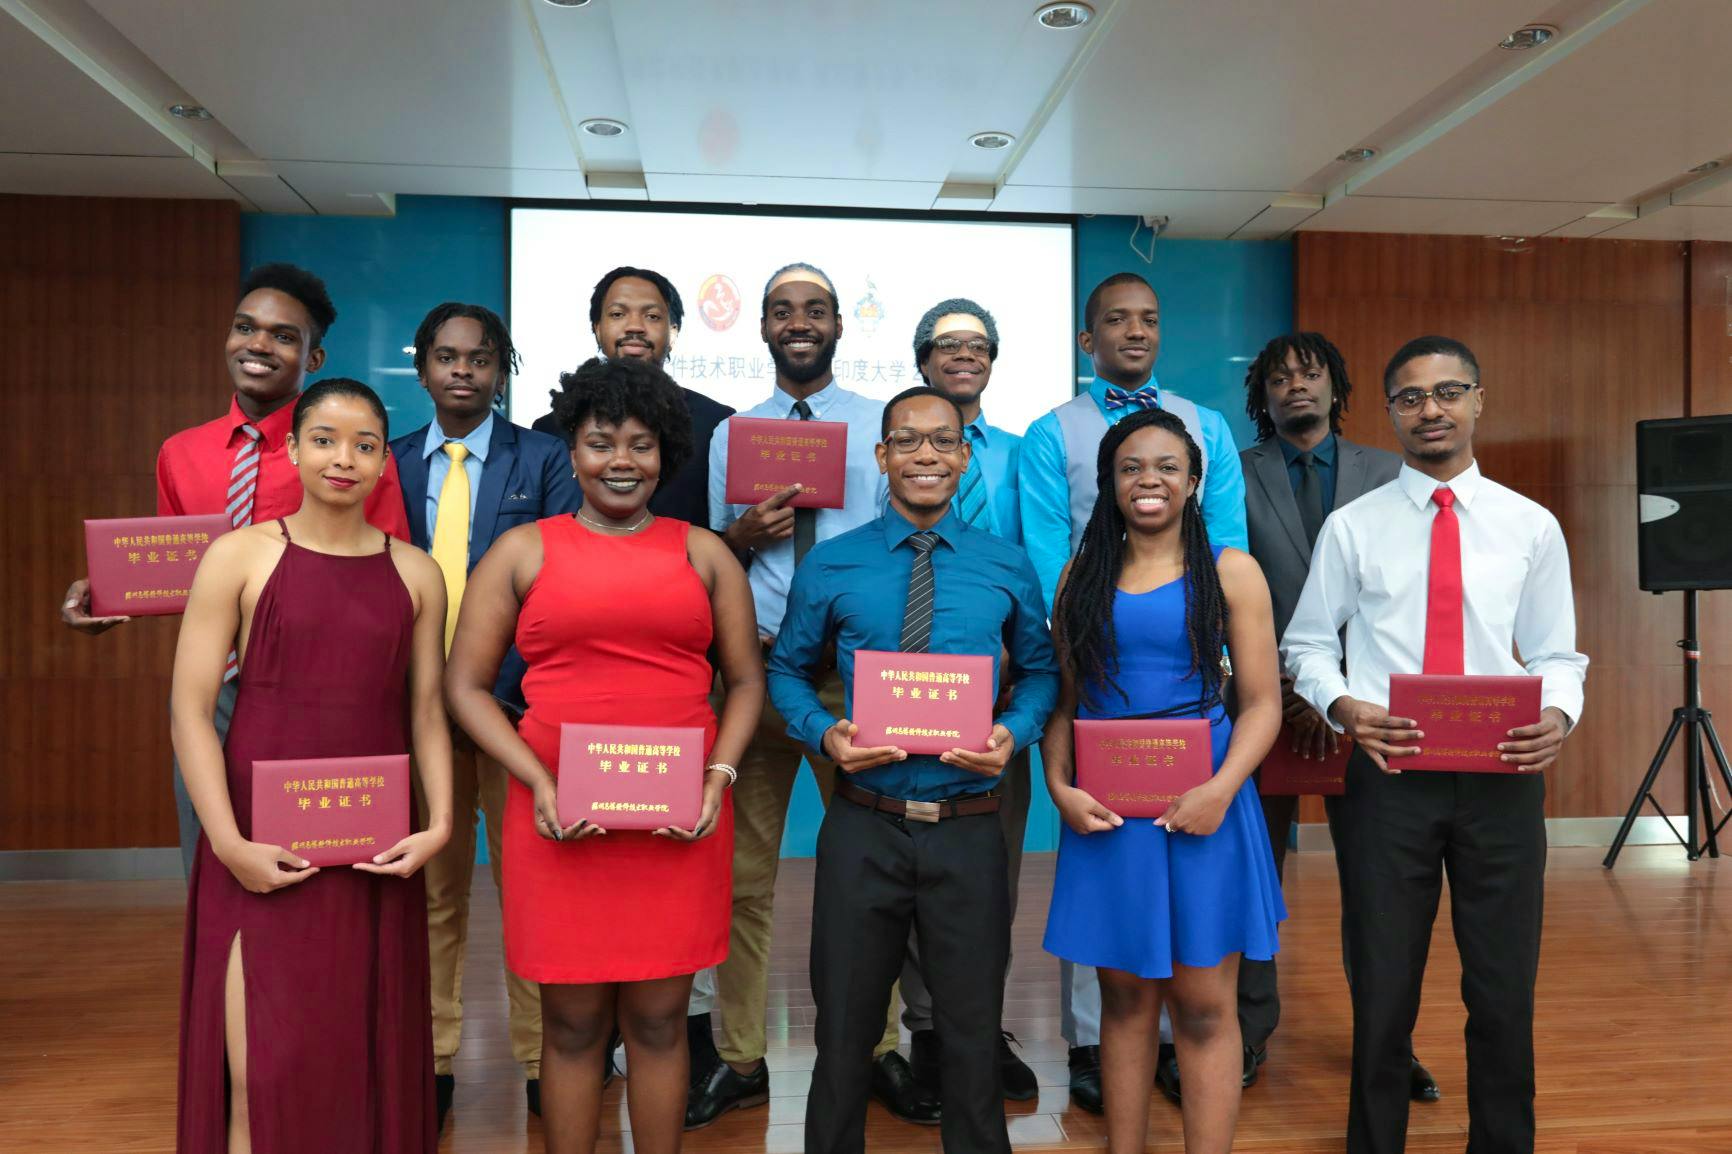 Study Software Engineering at the University of the West Indies